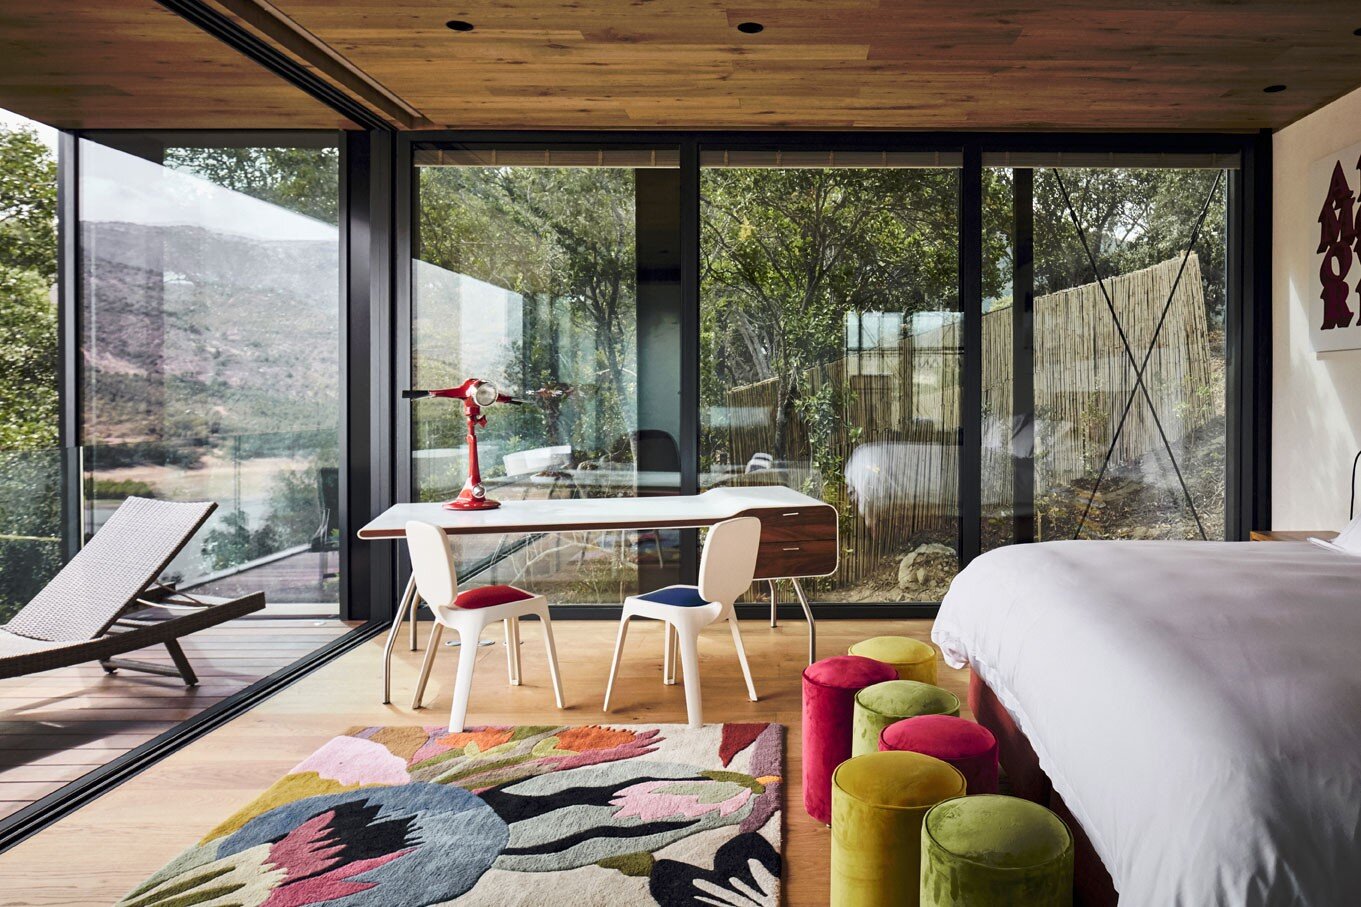 Letras Suite at Puro Vik Retreat in Chile - Glass-walled houses on cliffs overlooking the Millahue Valley 